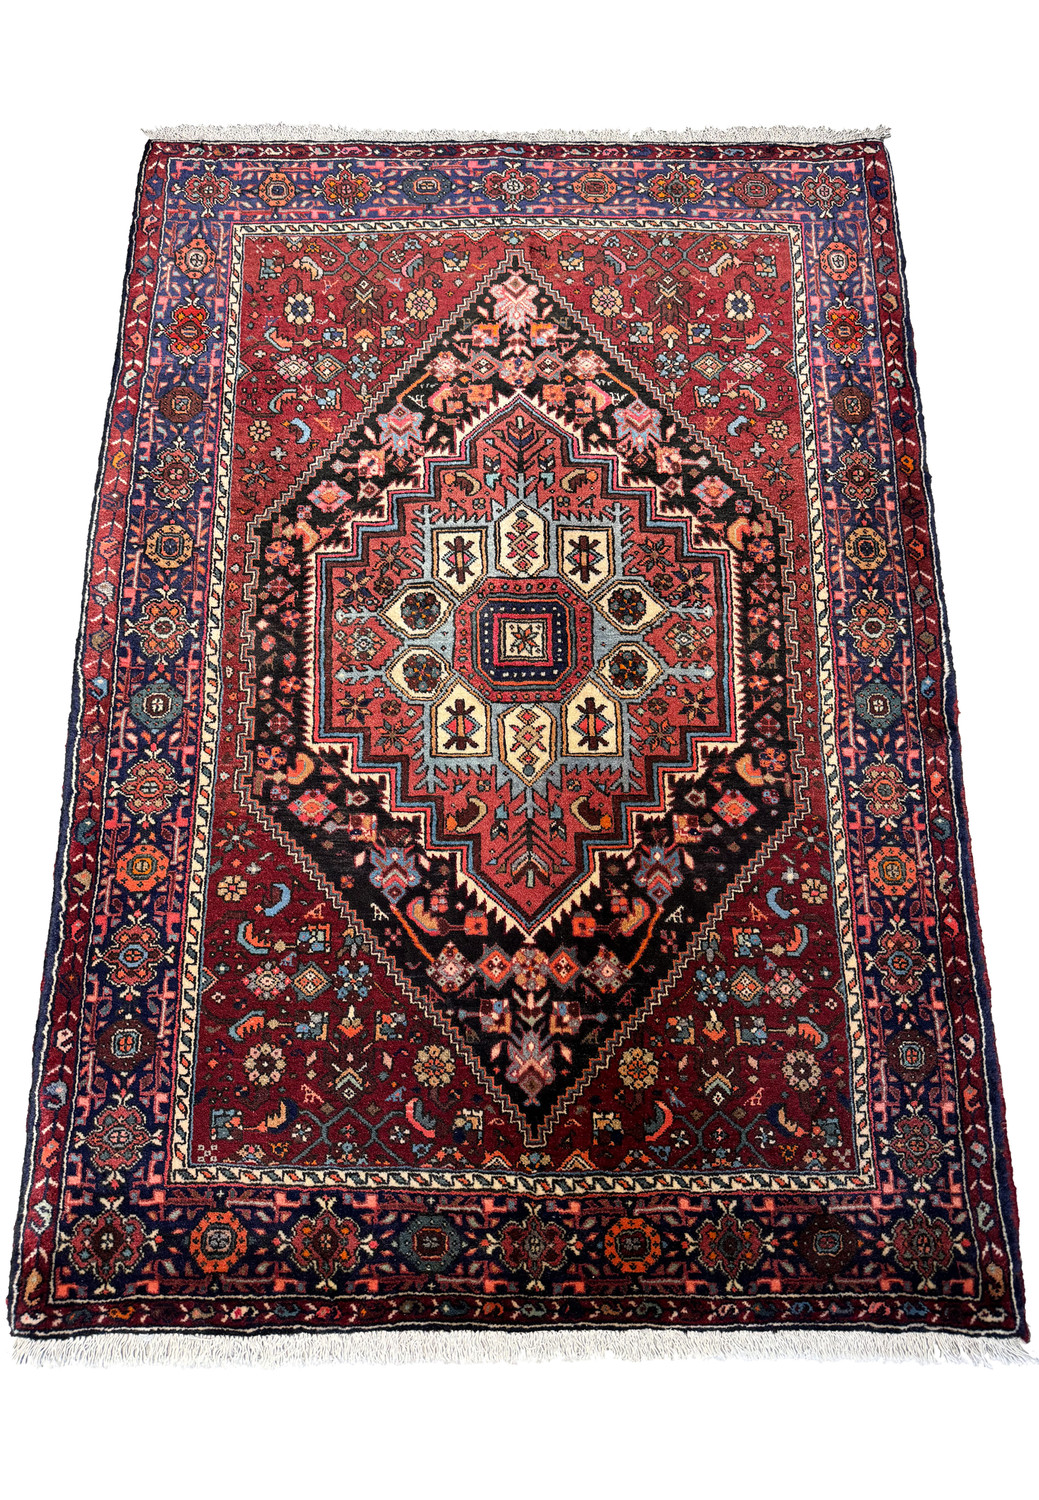 A full-view image of a traditional Persian Gholtogh rug laid flat, highlighting its symmetrical design and the detailed borders that frame the central motif.